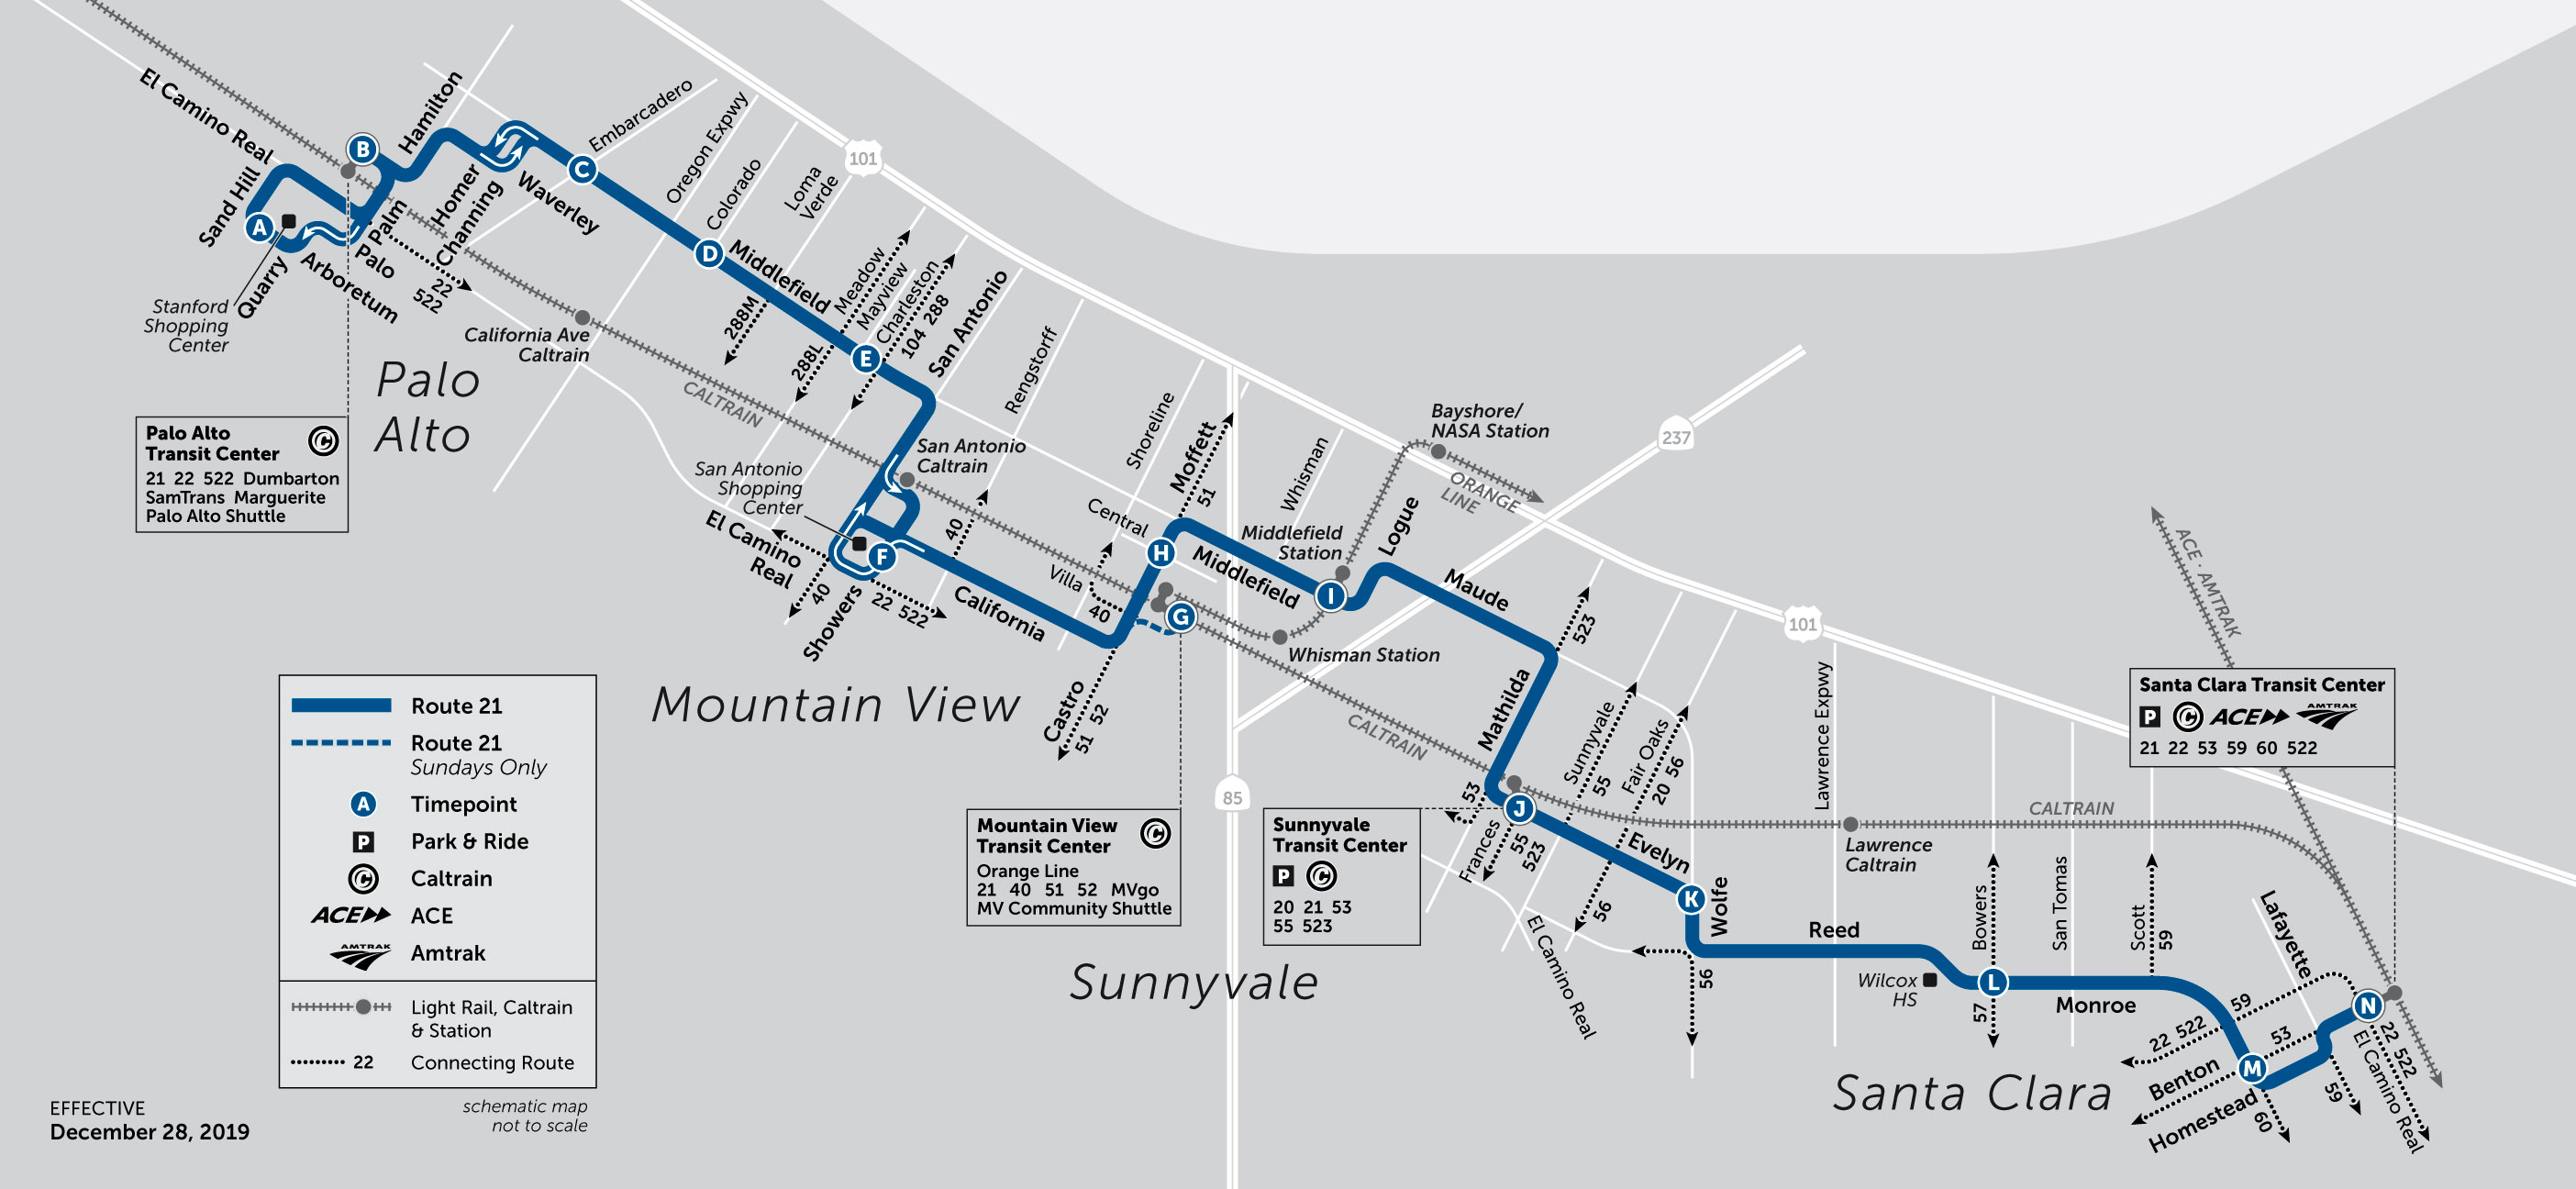 How to get to Stanford Shopping Center in Palo Alto by Bus or Train?